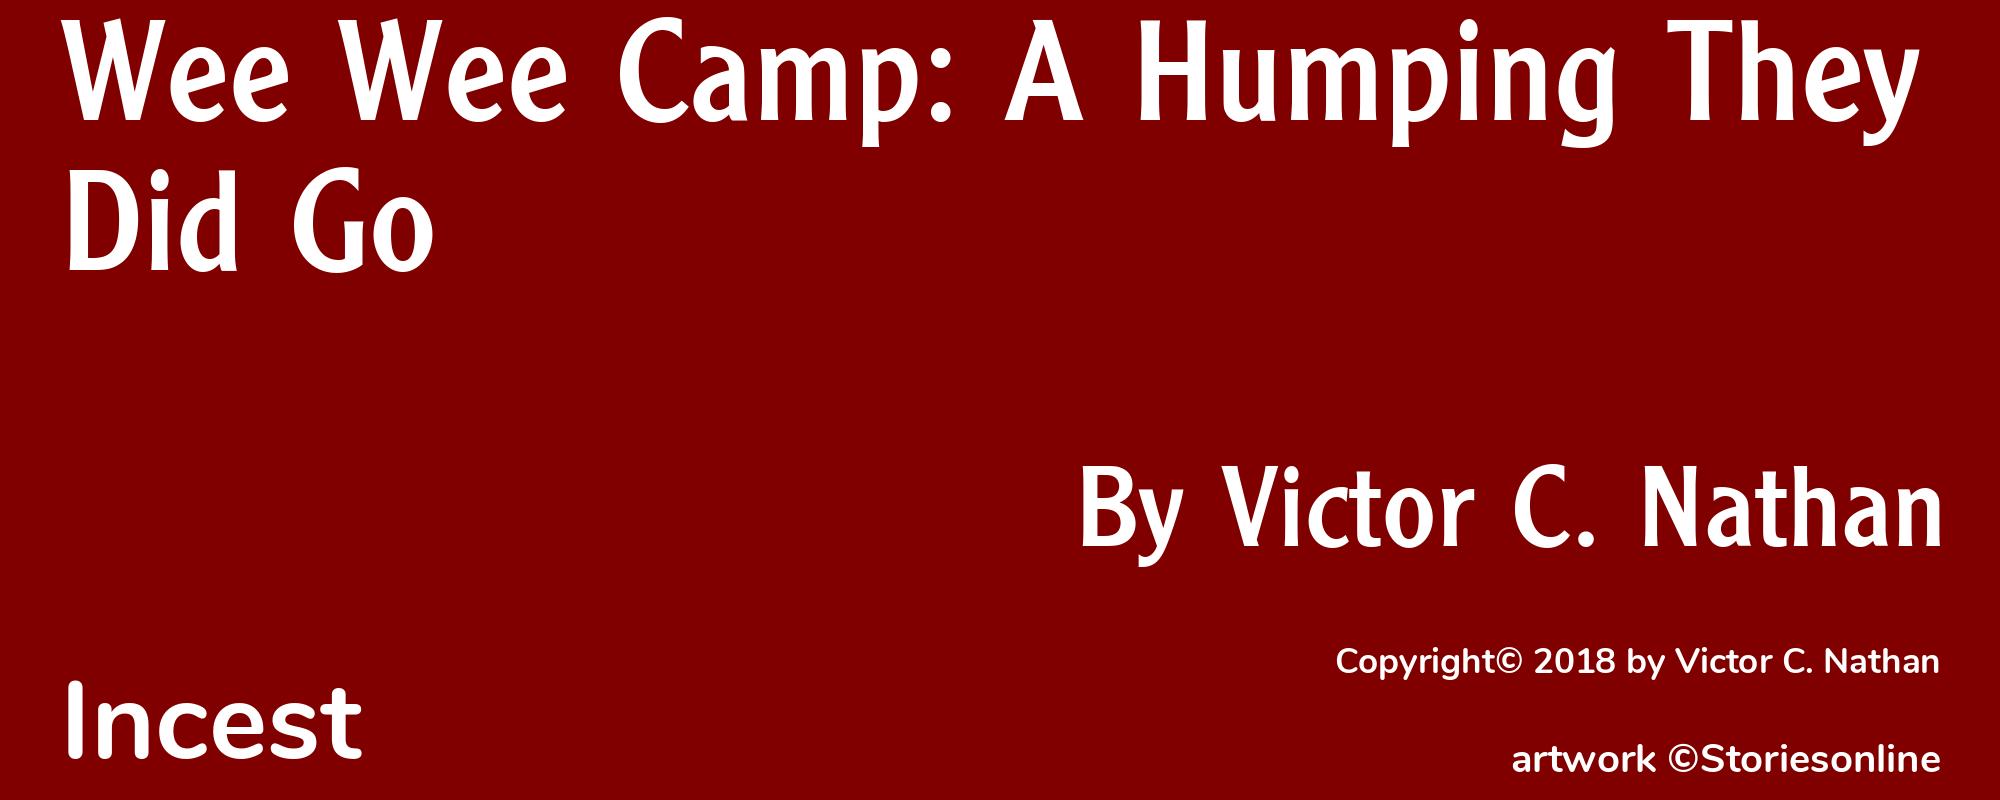 Wee Wee Camp: A Humping They Did Go - Cover